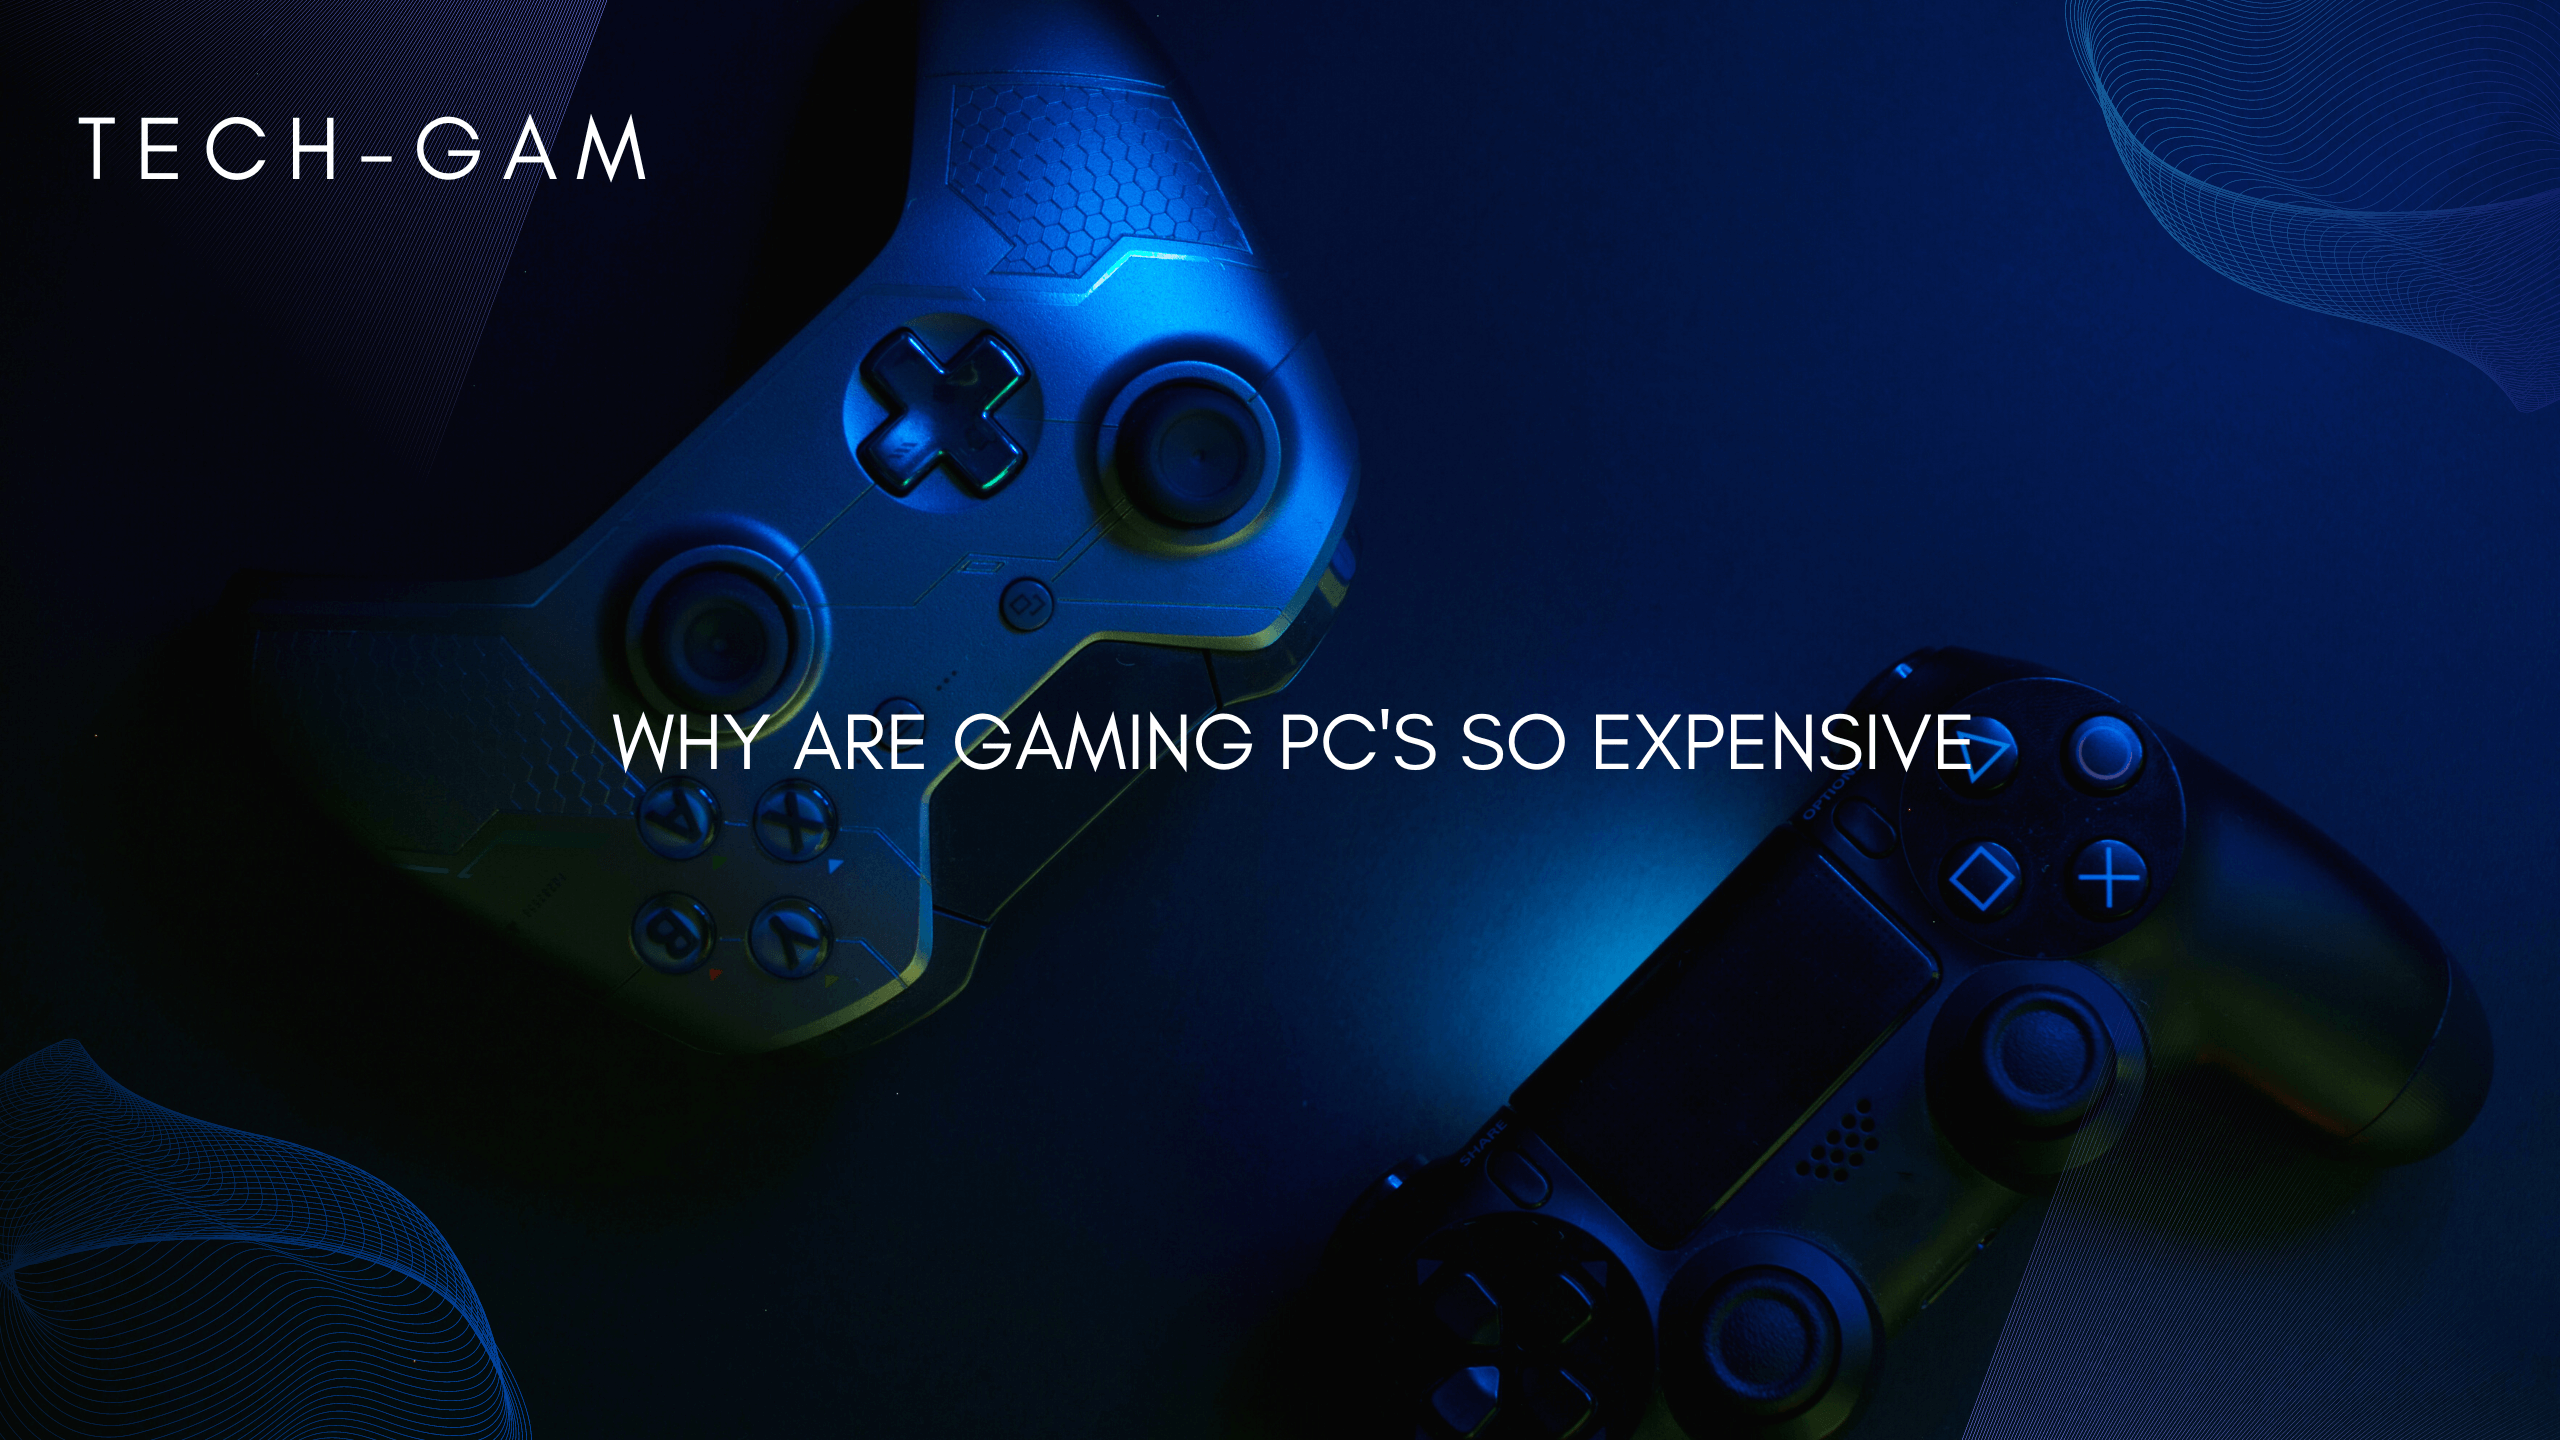 Reasons of high priced gaming PC's